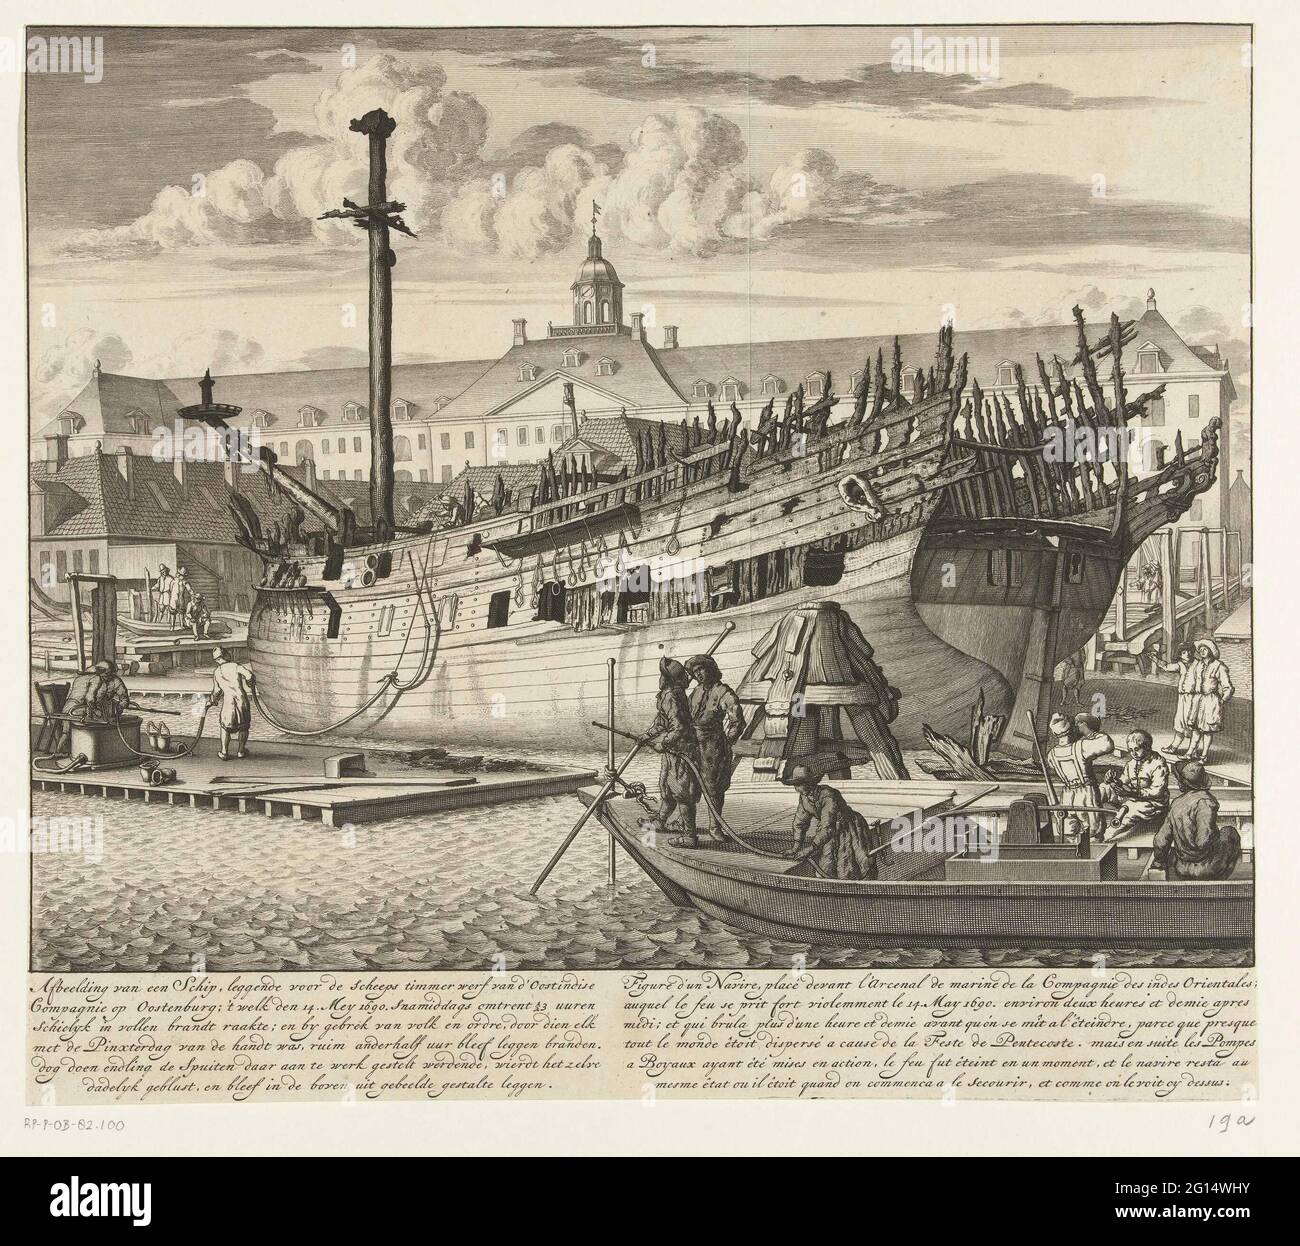 A VOC (Dutch East India Company) ship damaged by fire at the wharf on  Oostenburg Island, Works of Art, RA Collection